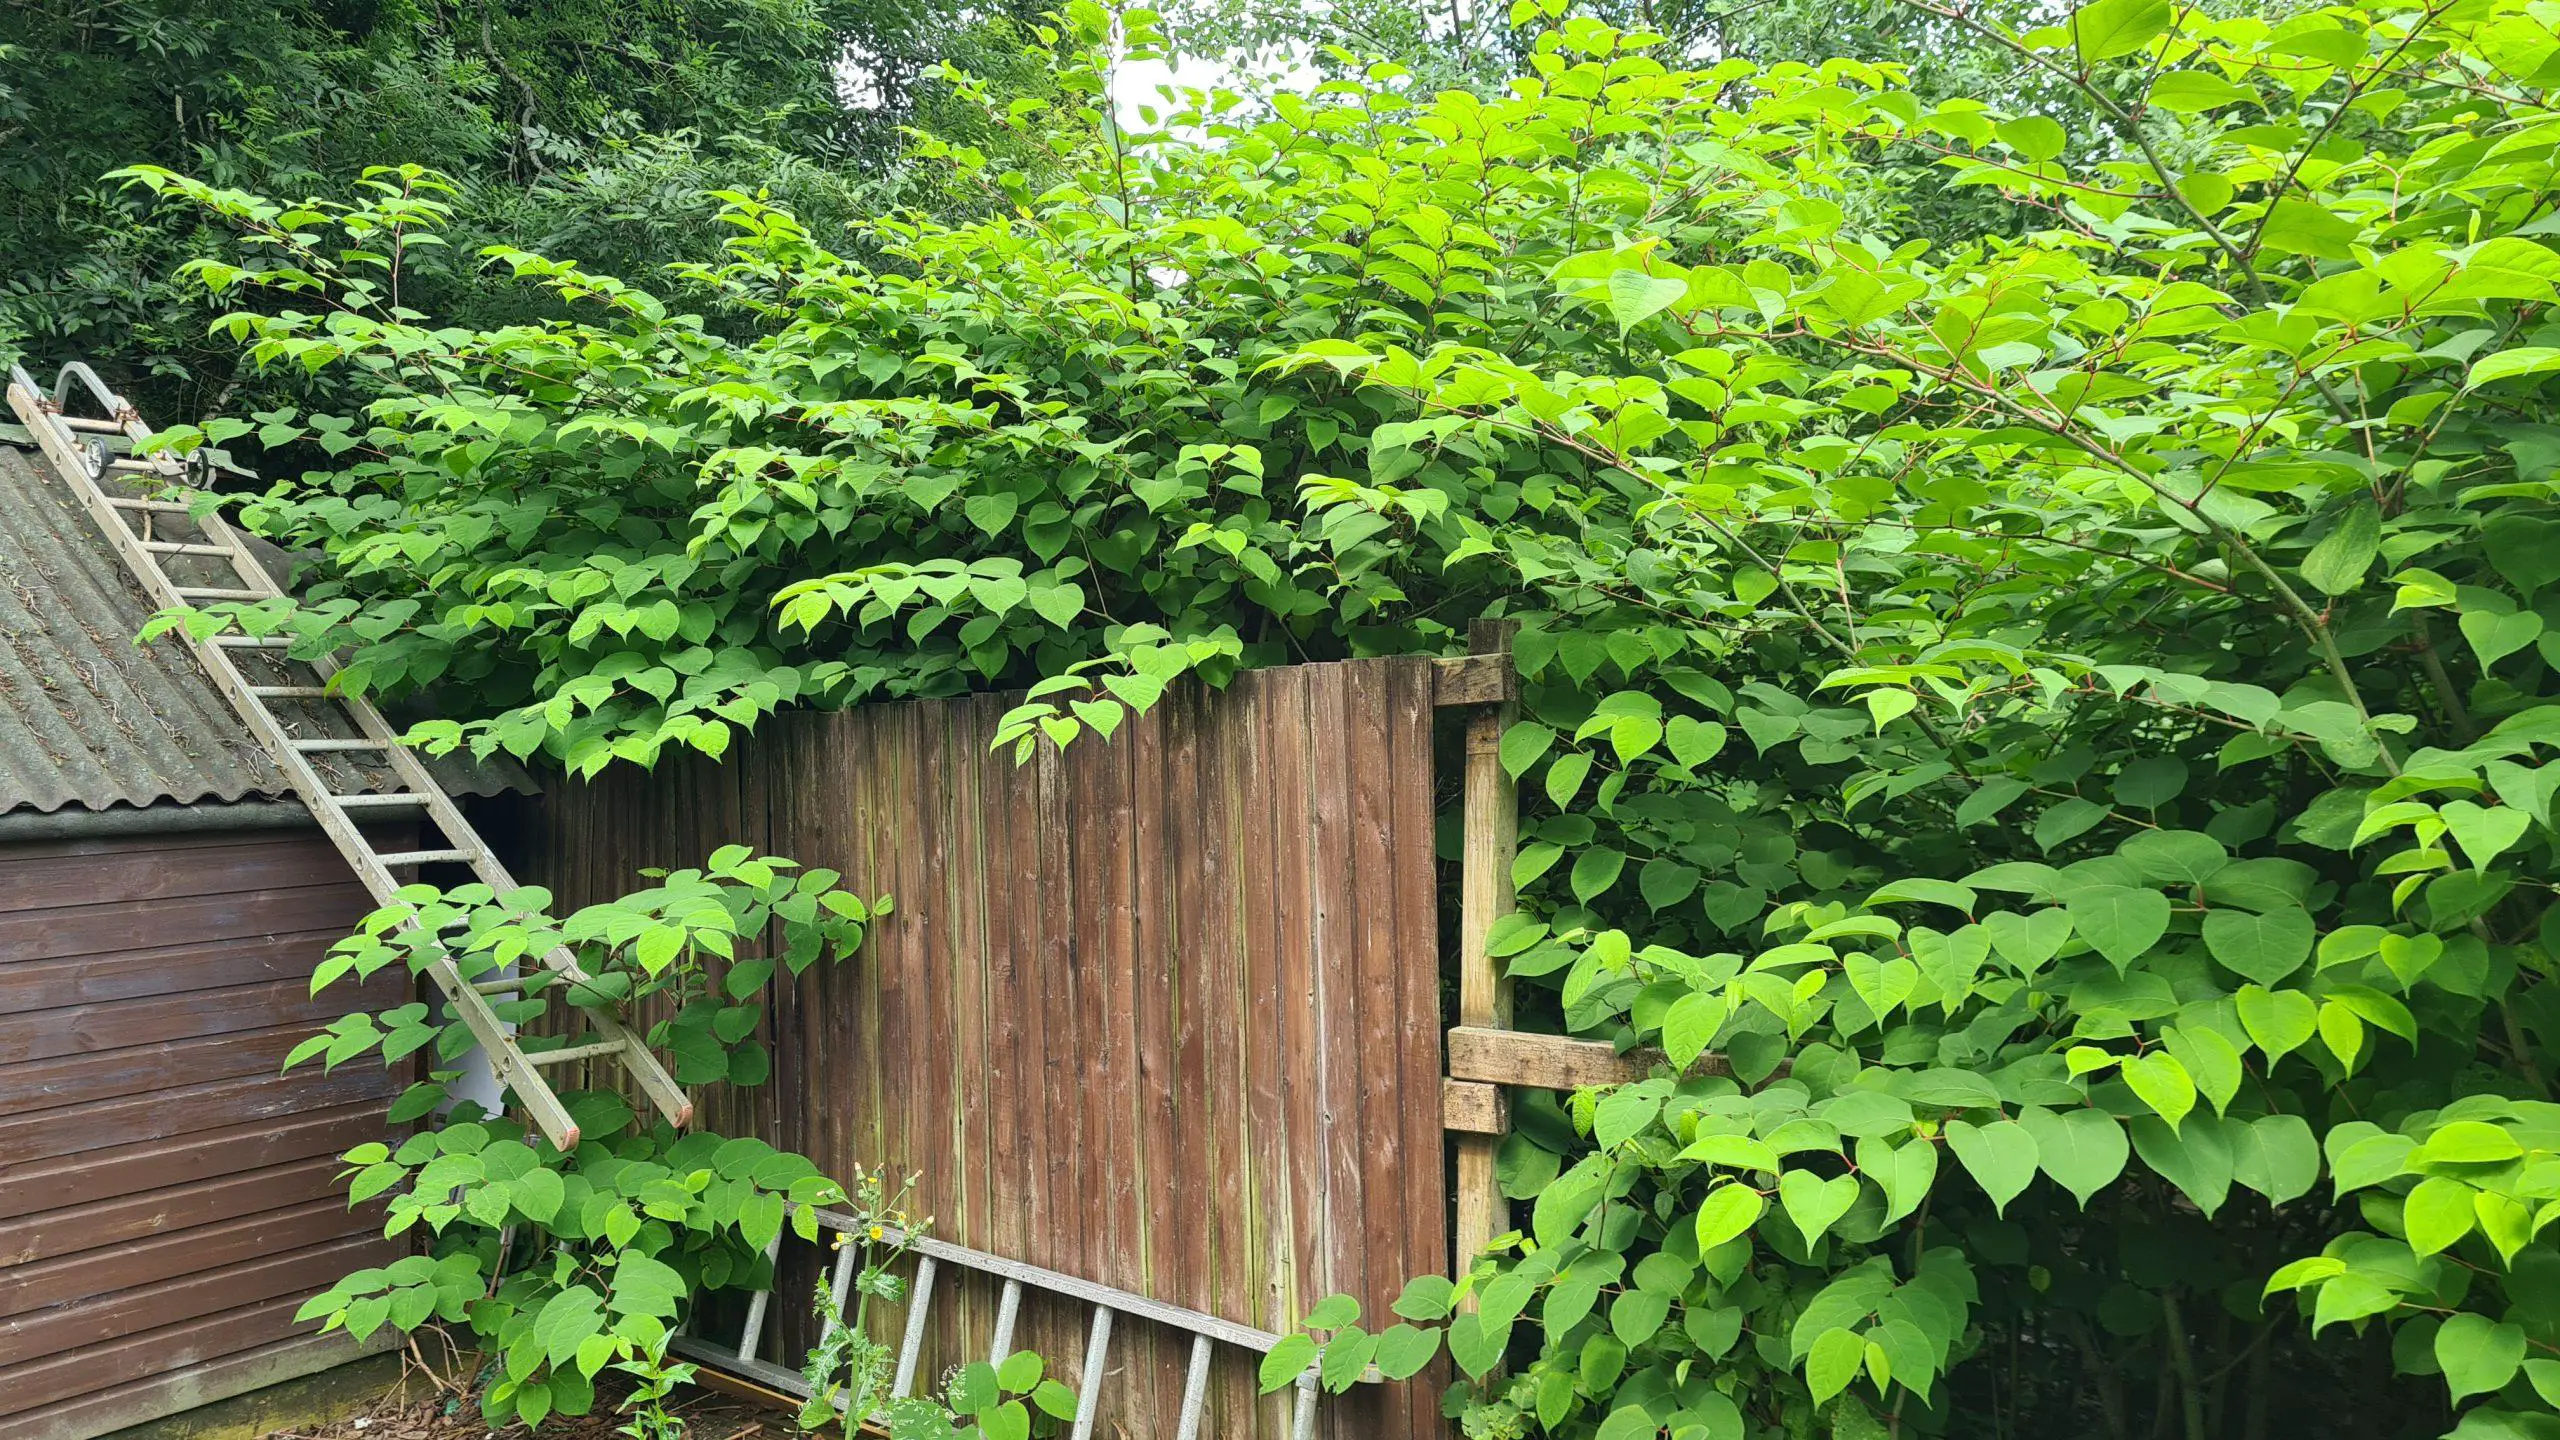 Finding the best method to kill Japanese knotweed on your property